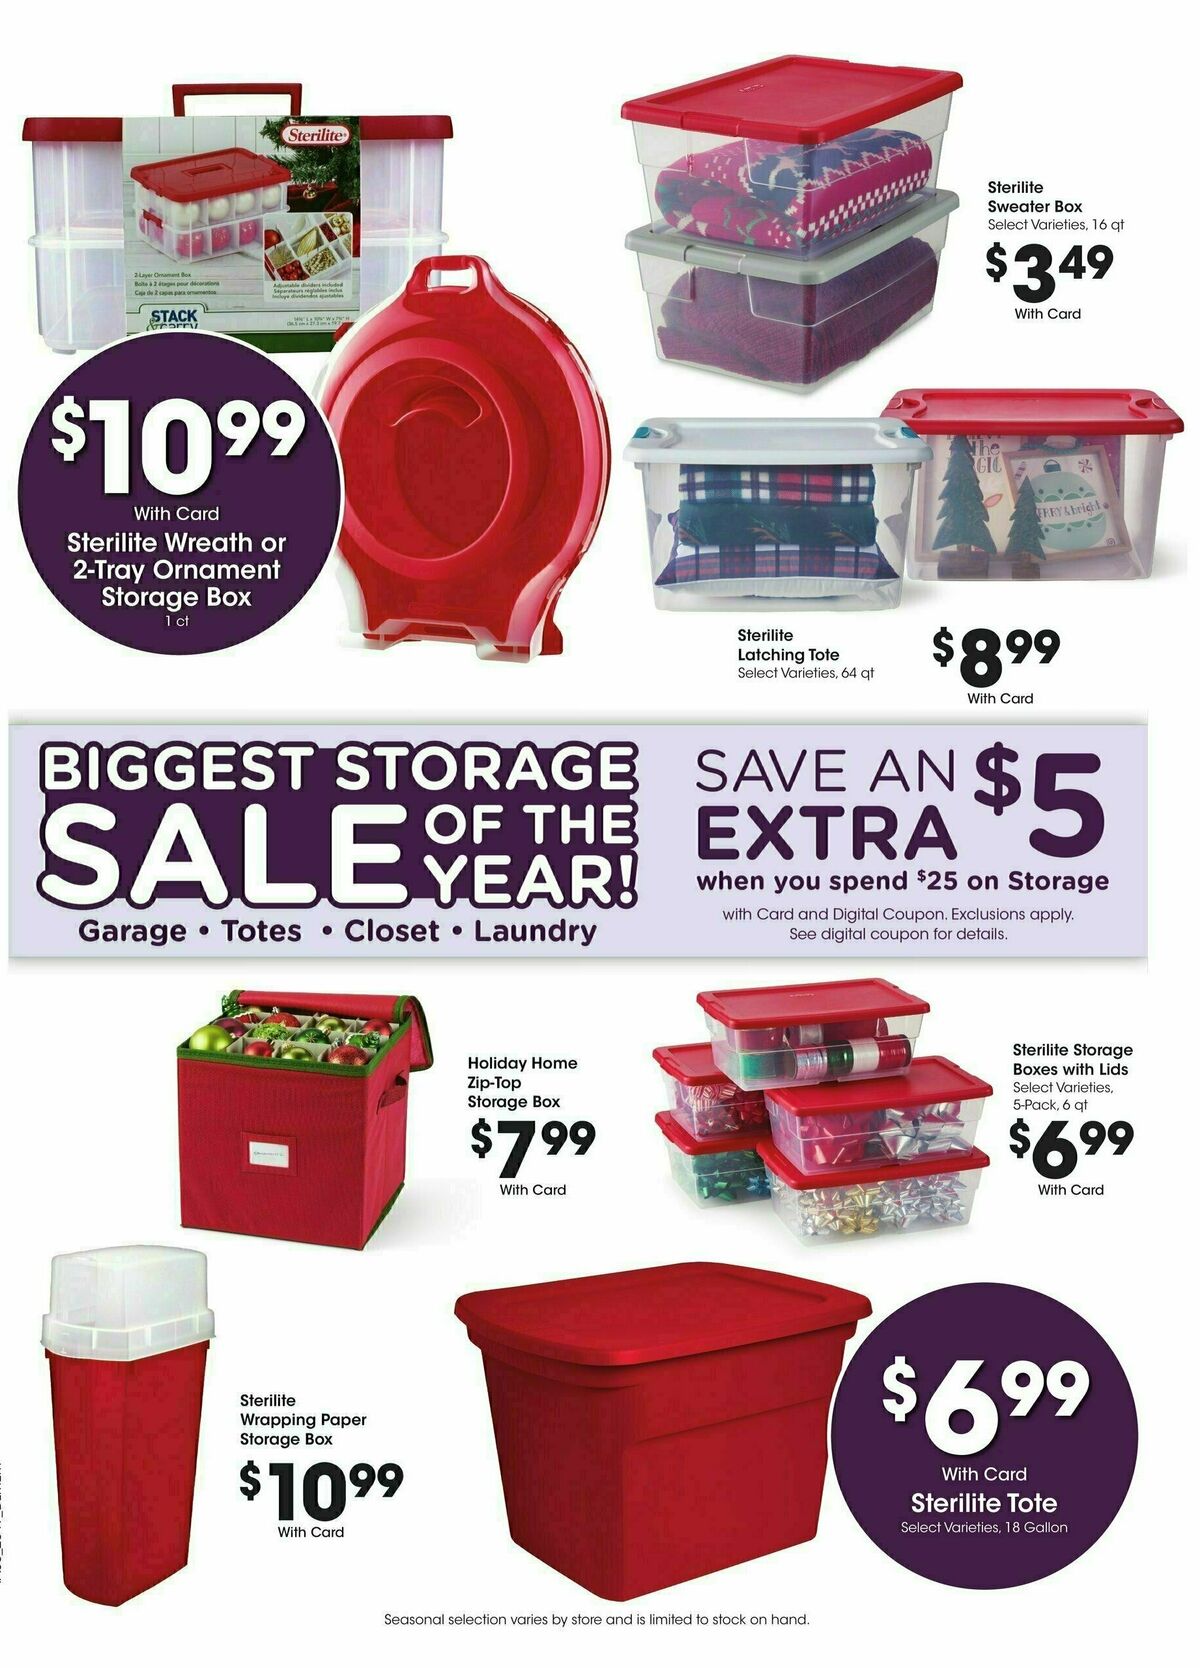 Kroger Weekly Ad from January 3